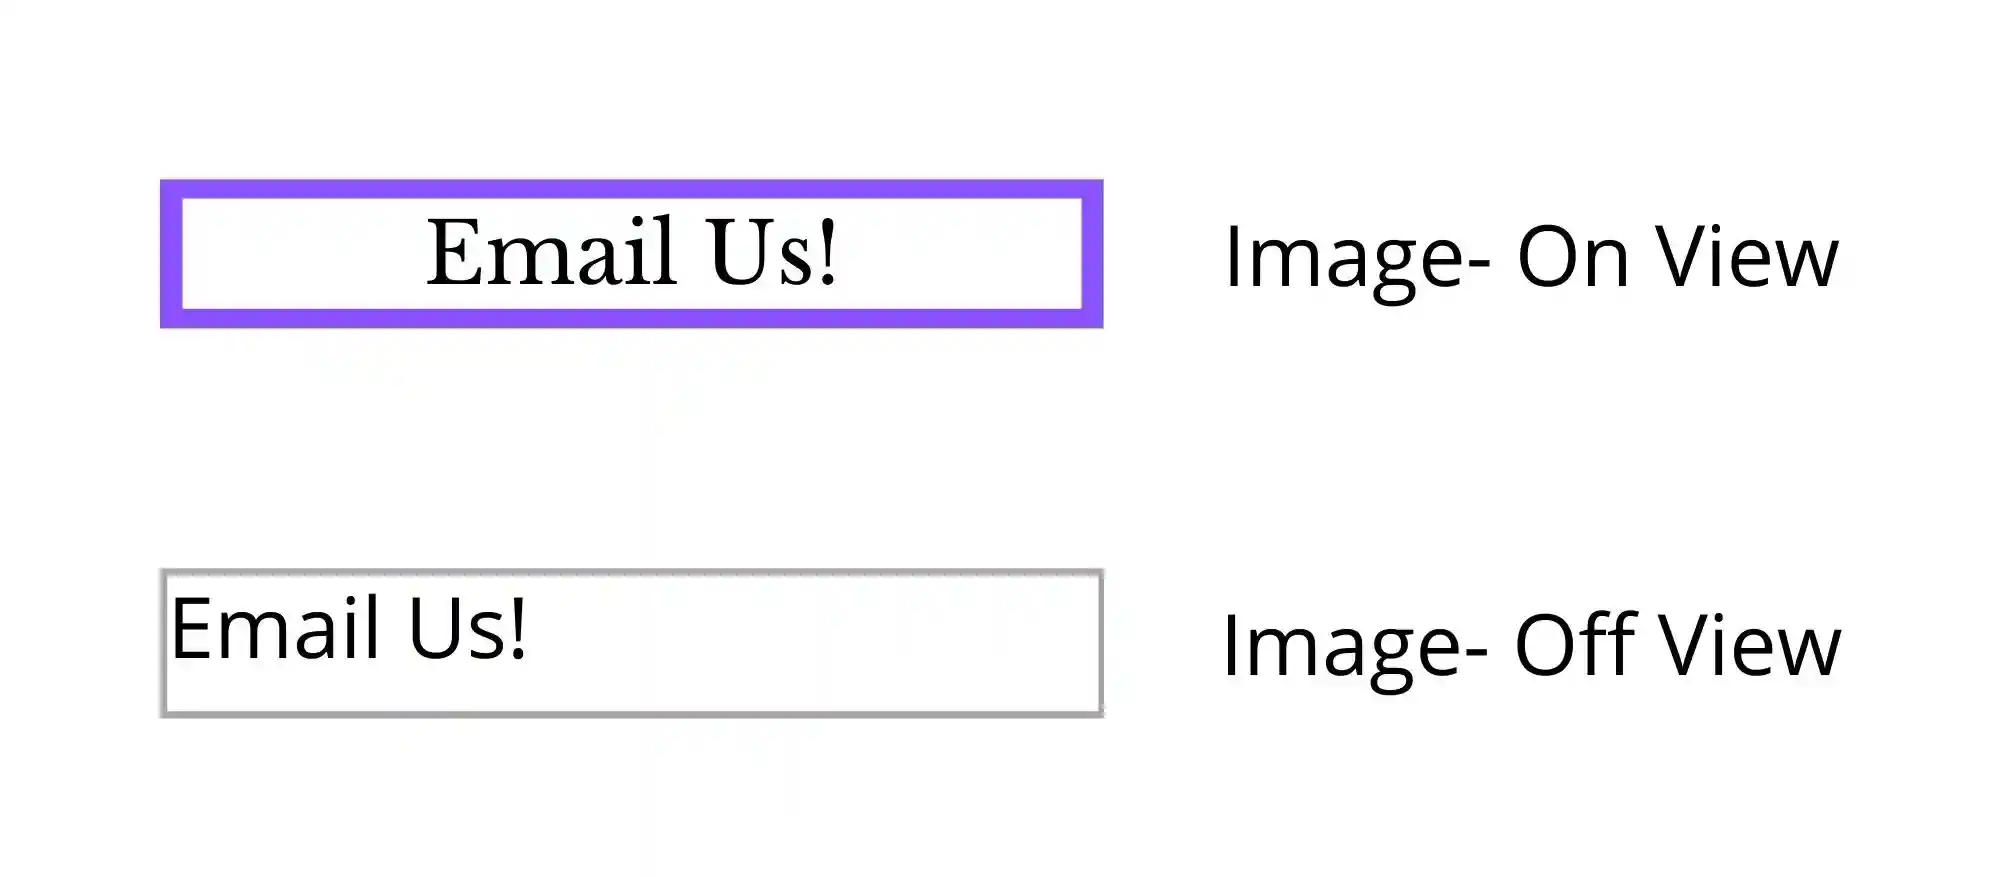 Add email button- Image sample